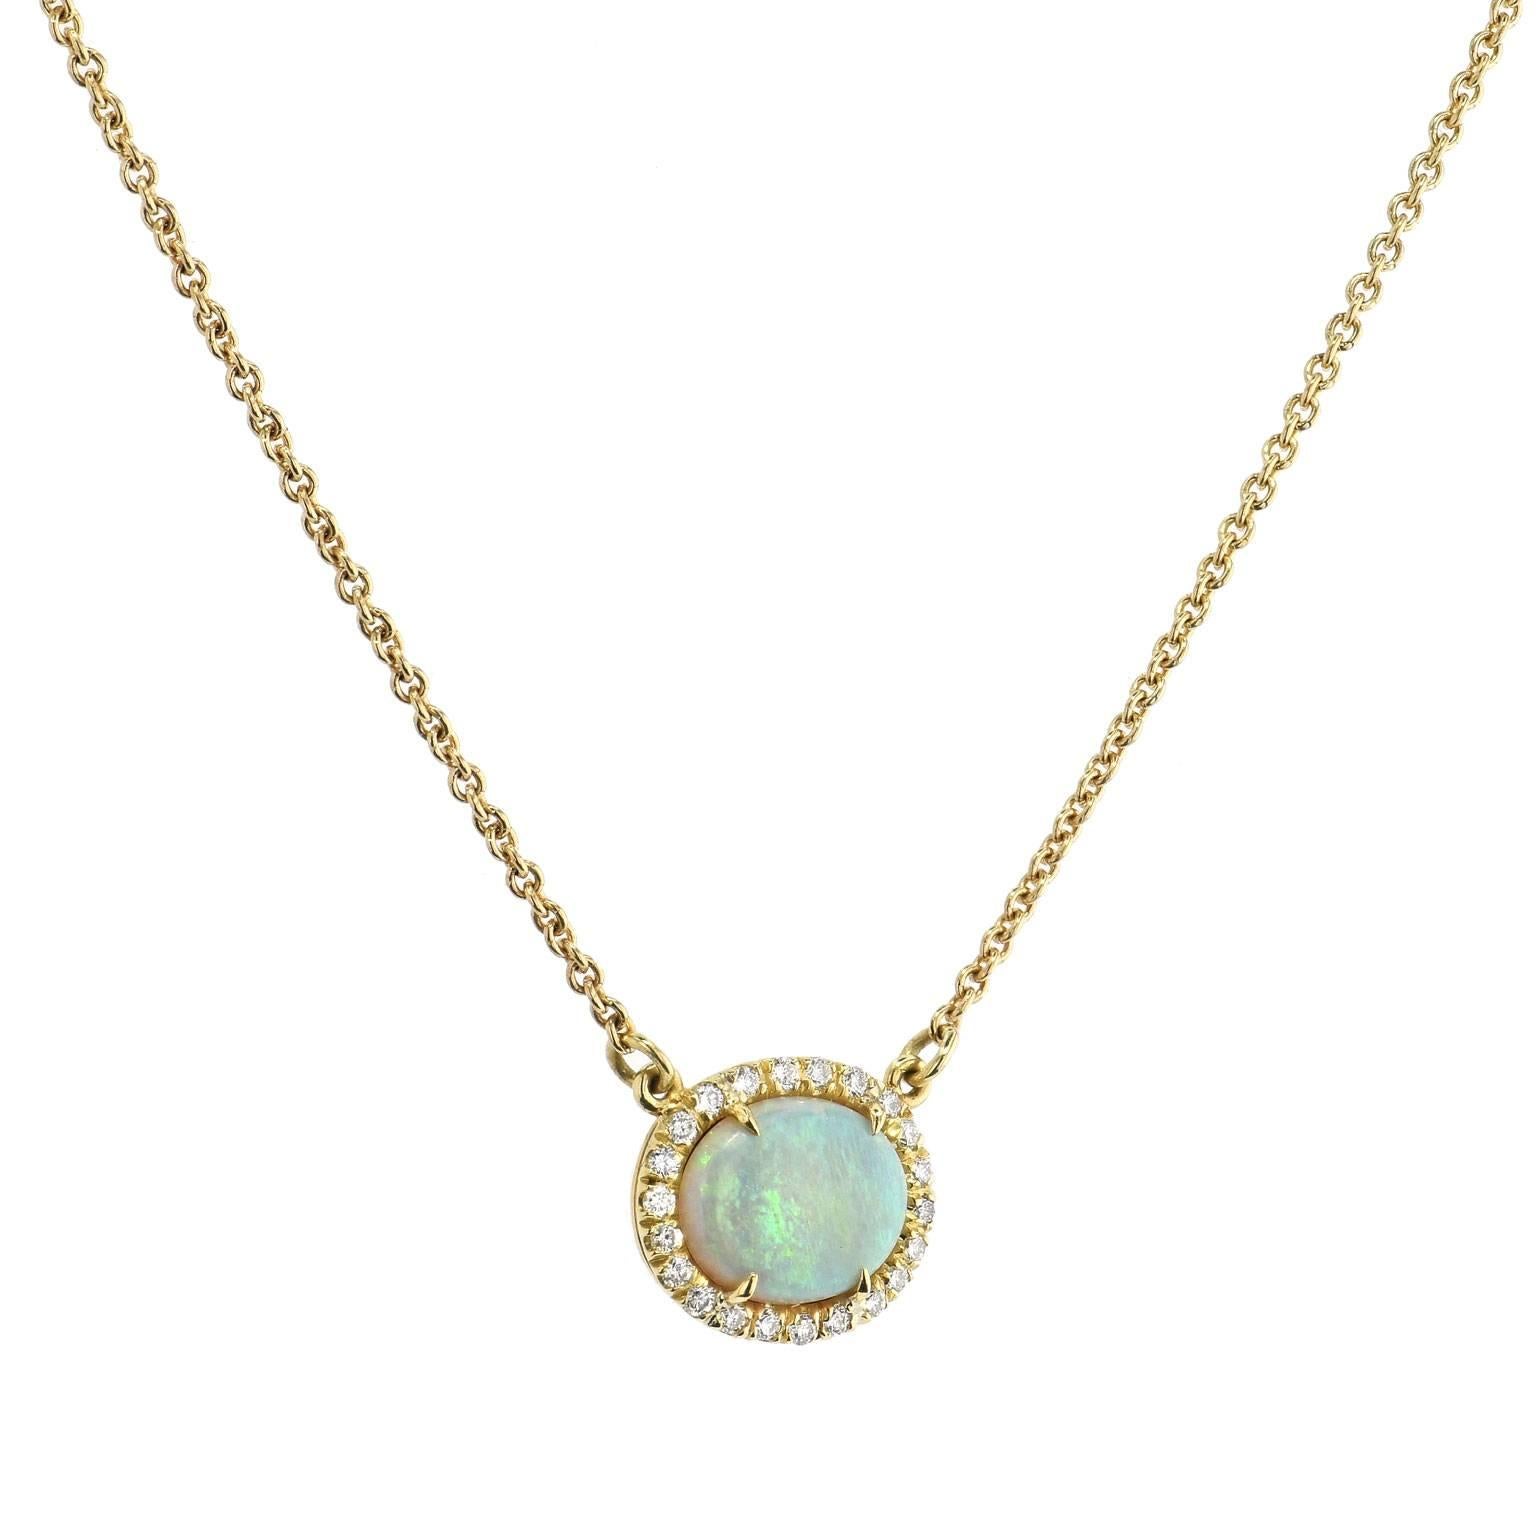 Australia is one of the best bearers of the radiant opal. Handcrafted by H, this 18 karat yellow gold pendant necklace features a luminous 0.92 carat Australian Opal at center and is embraced by 0.14 carat of diamond in halo (G/H/SI1). Strung on an